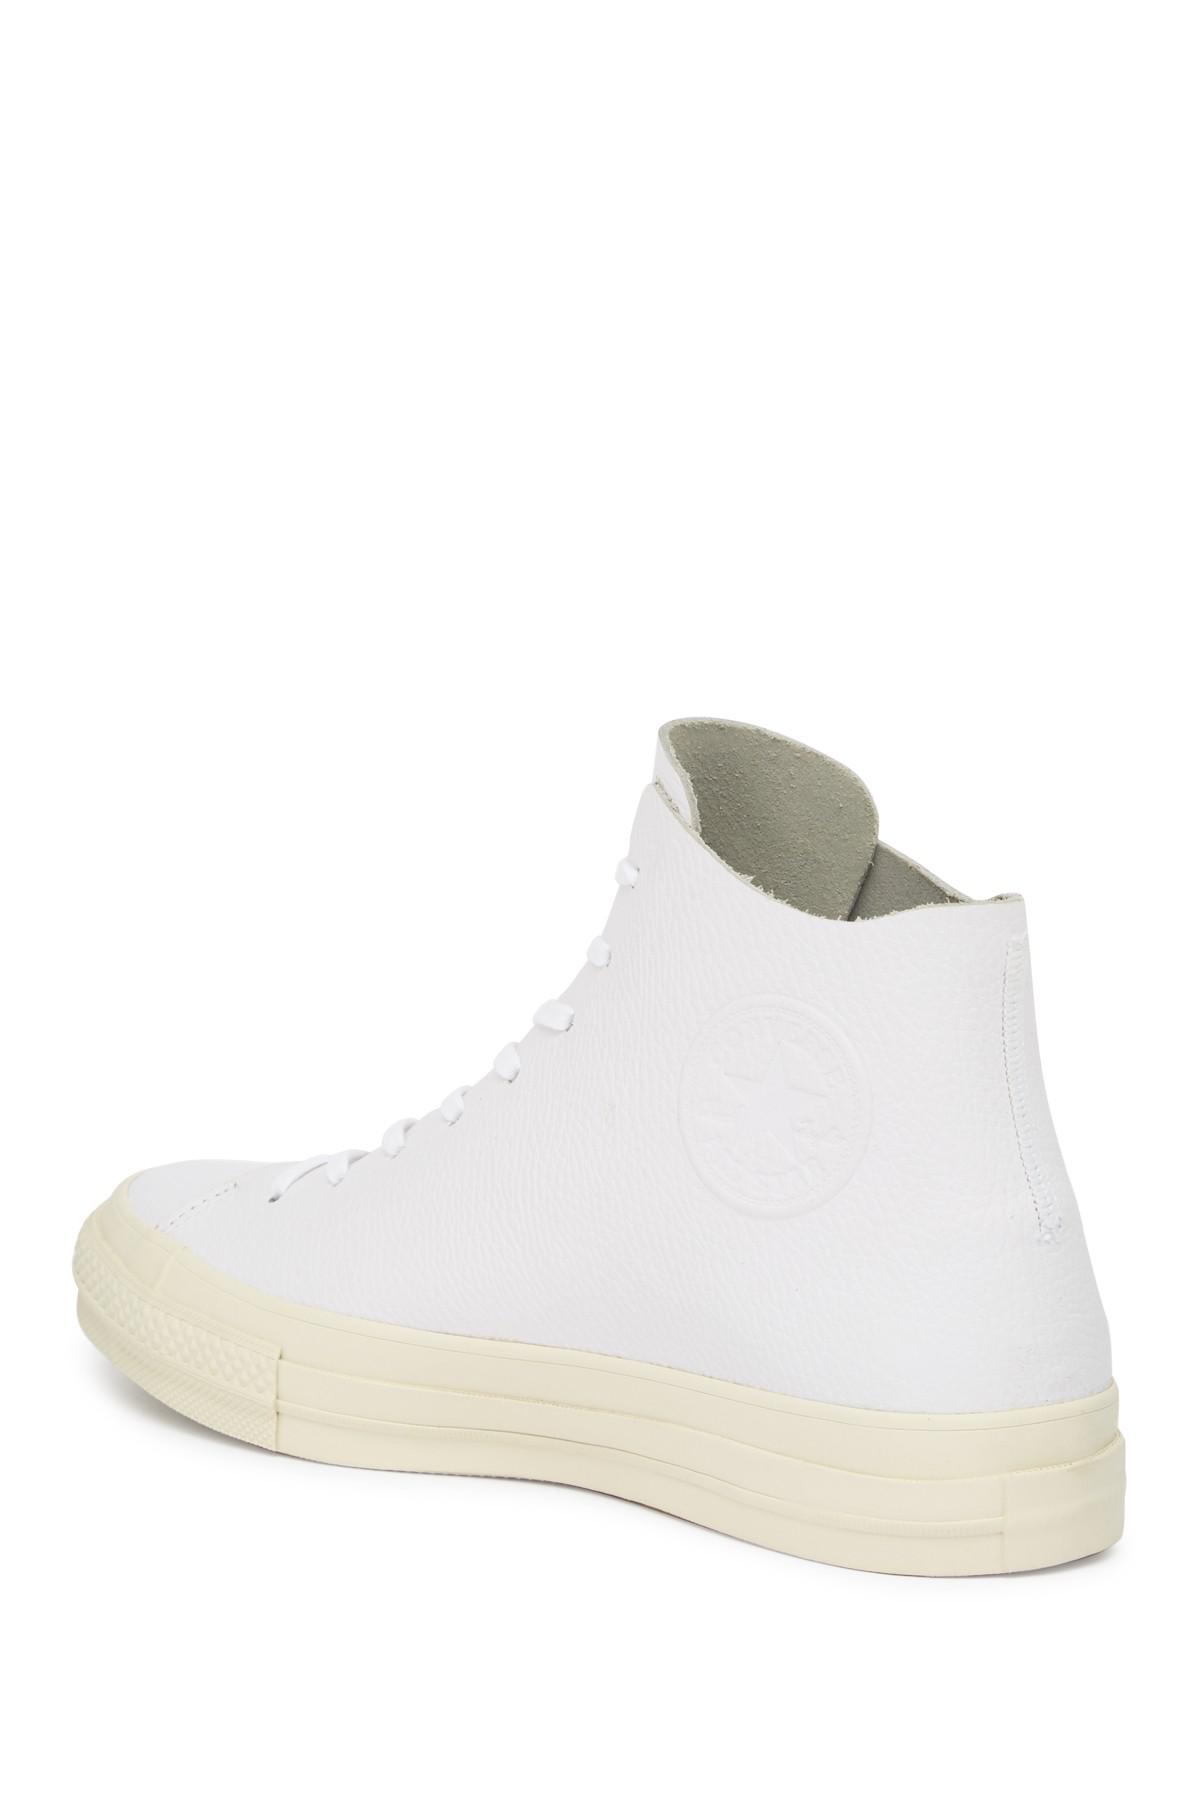 Converse Prime High Top Leather Sneaker 